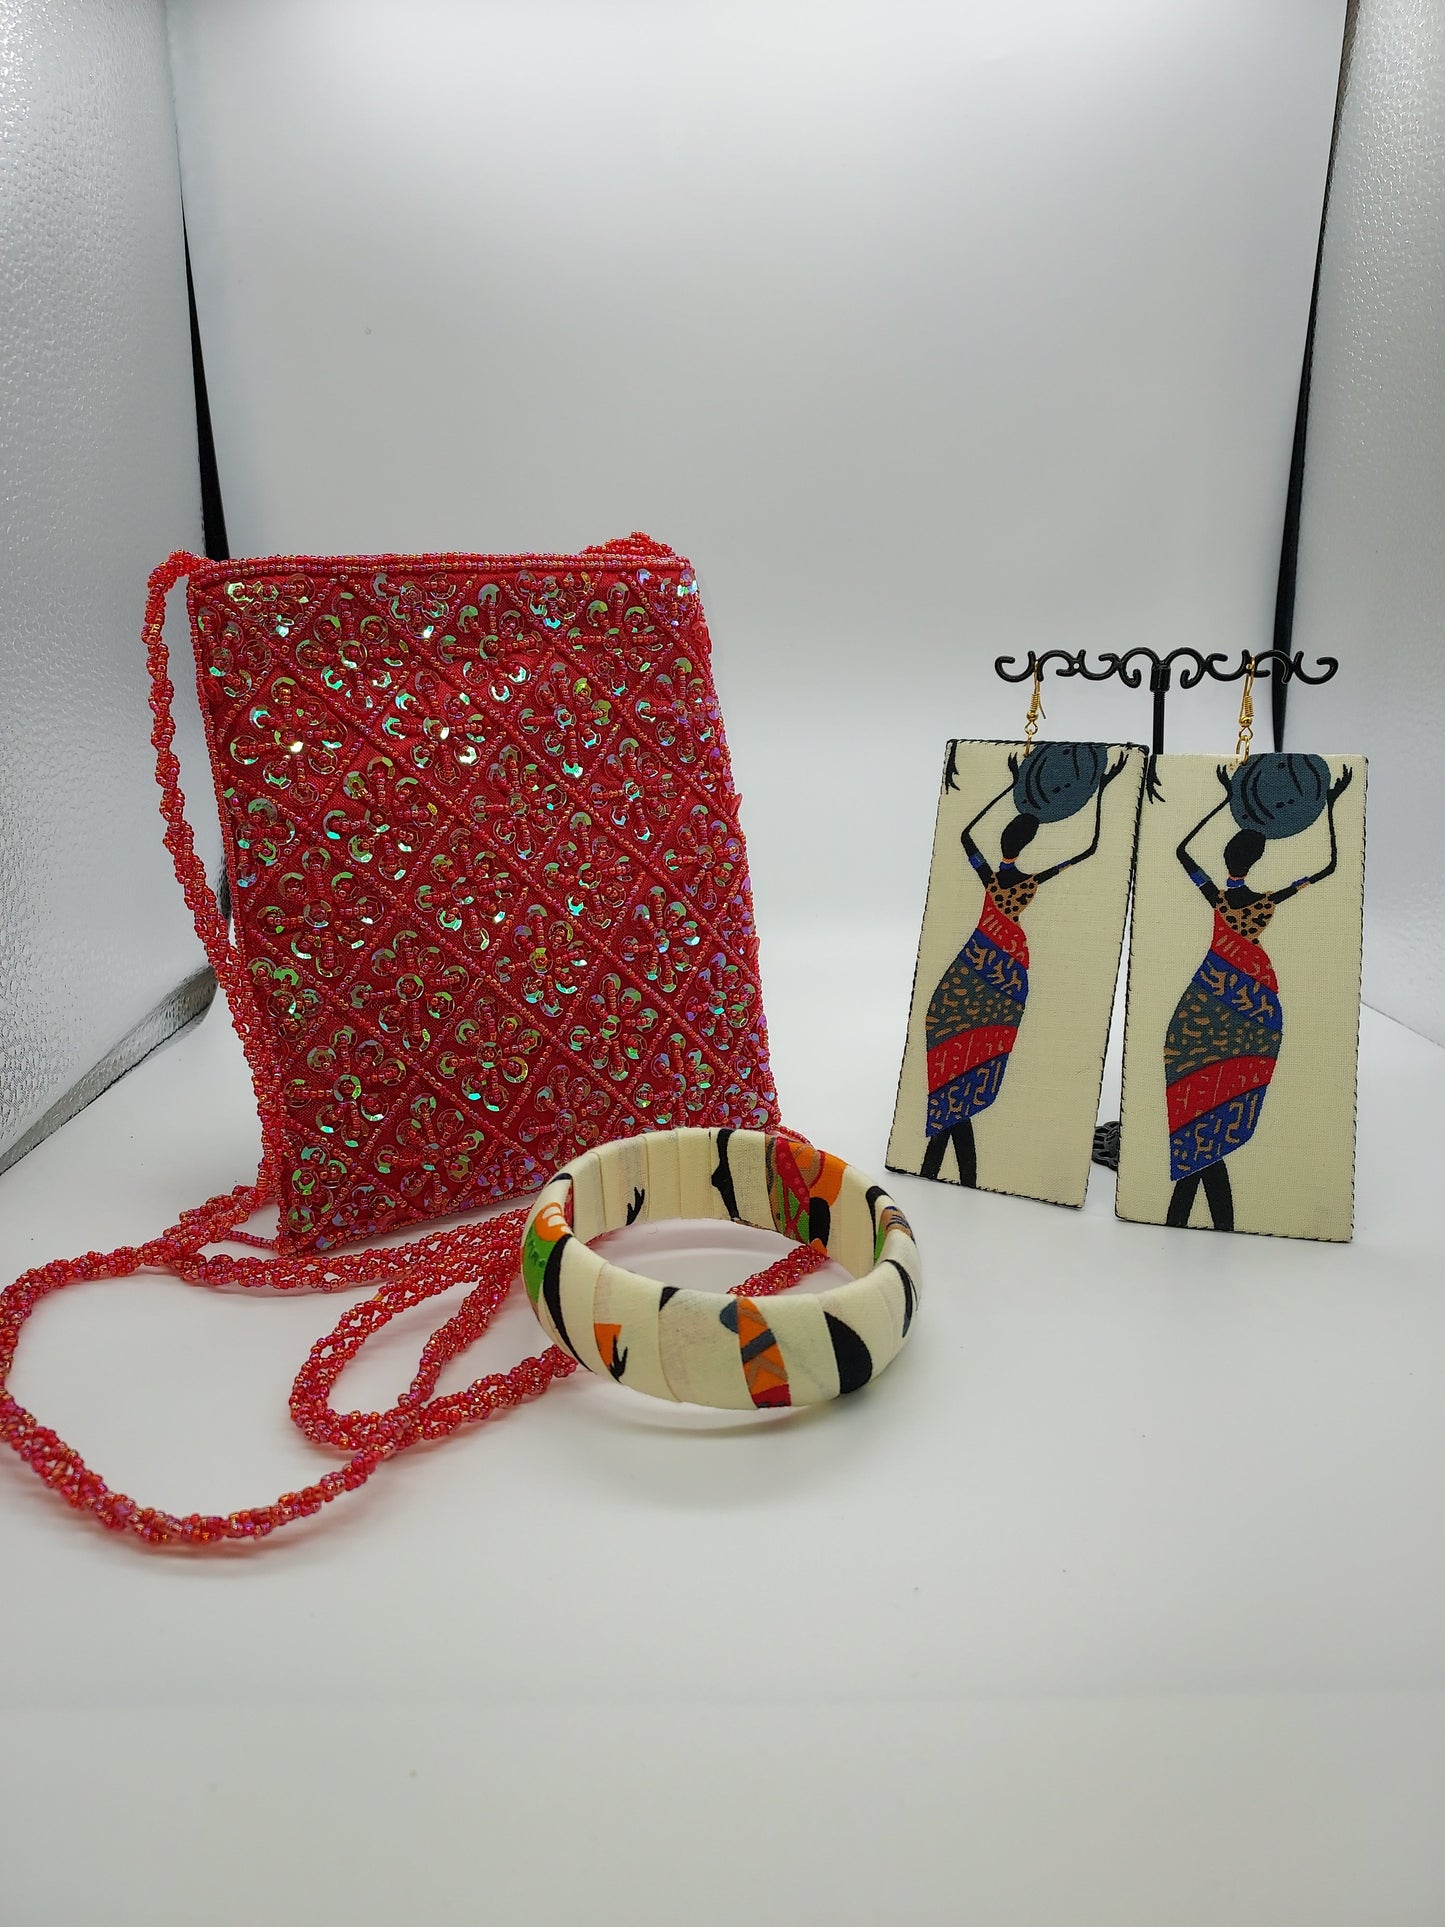 Red Handcrafted Beaded Bag and figurine Jewelry set